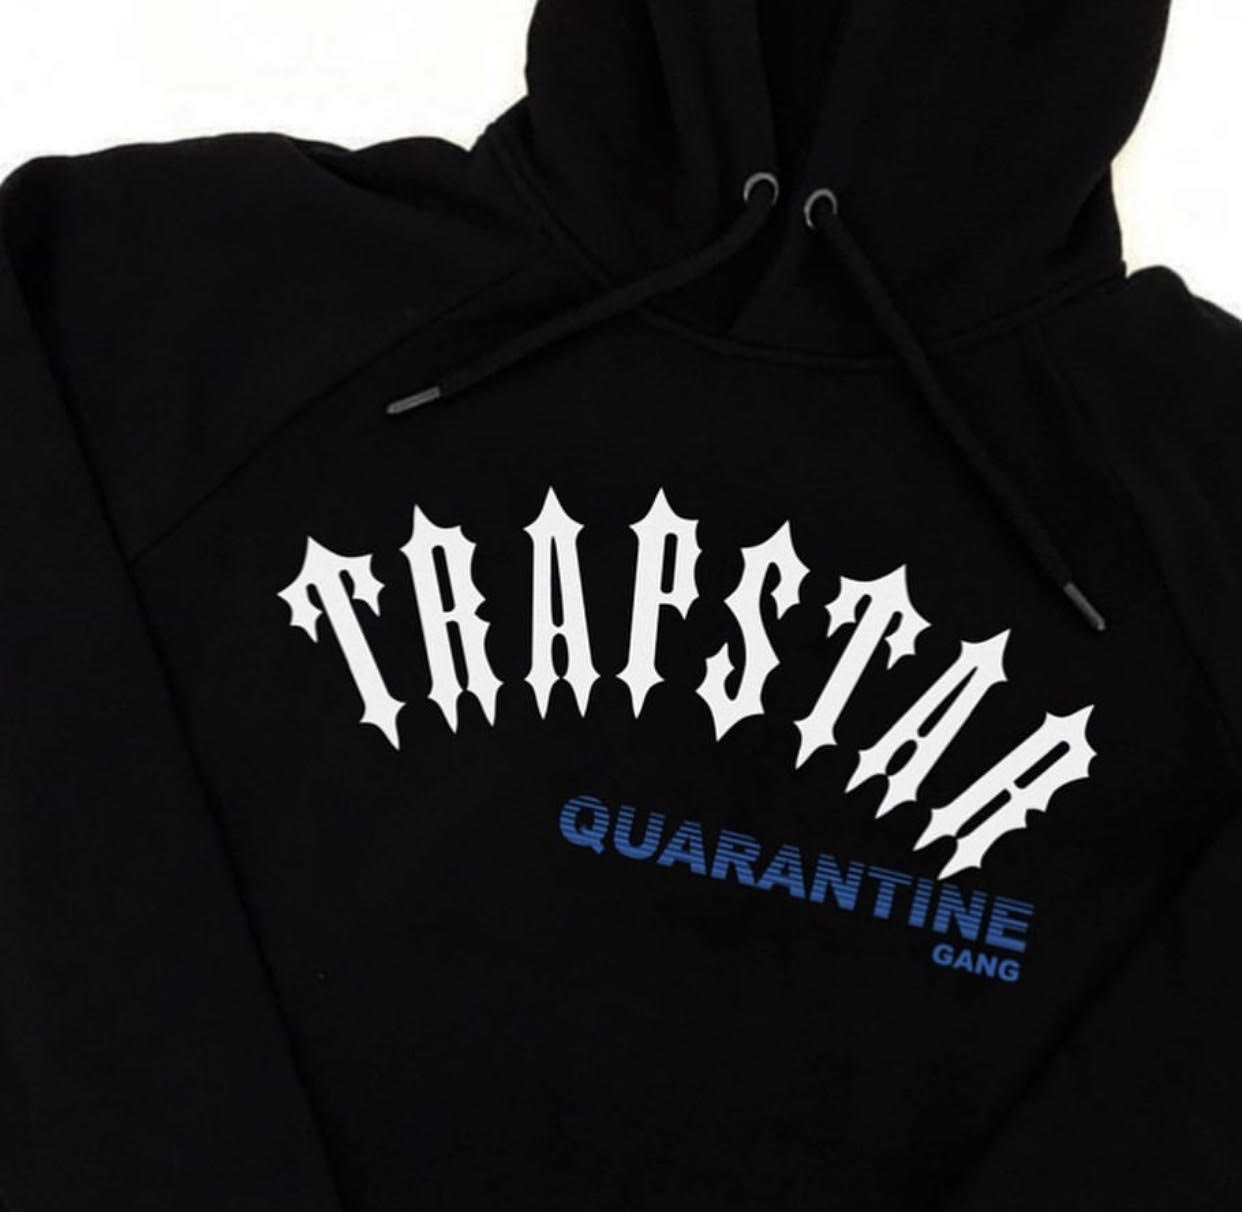 Trapstar London Preview For COVID-19 Charitable Collection